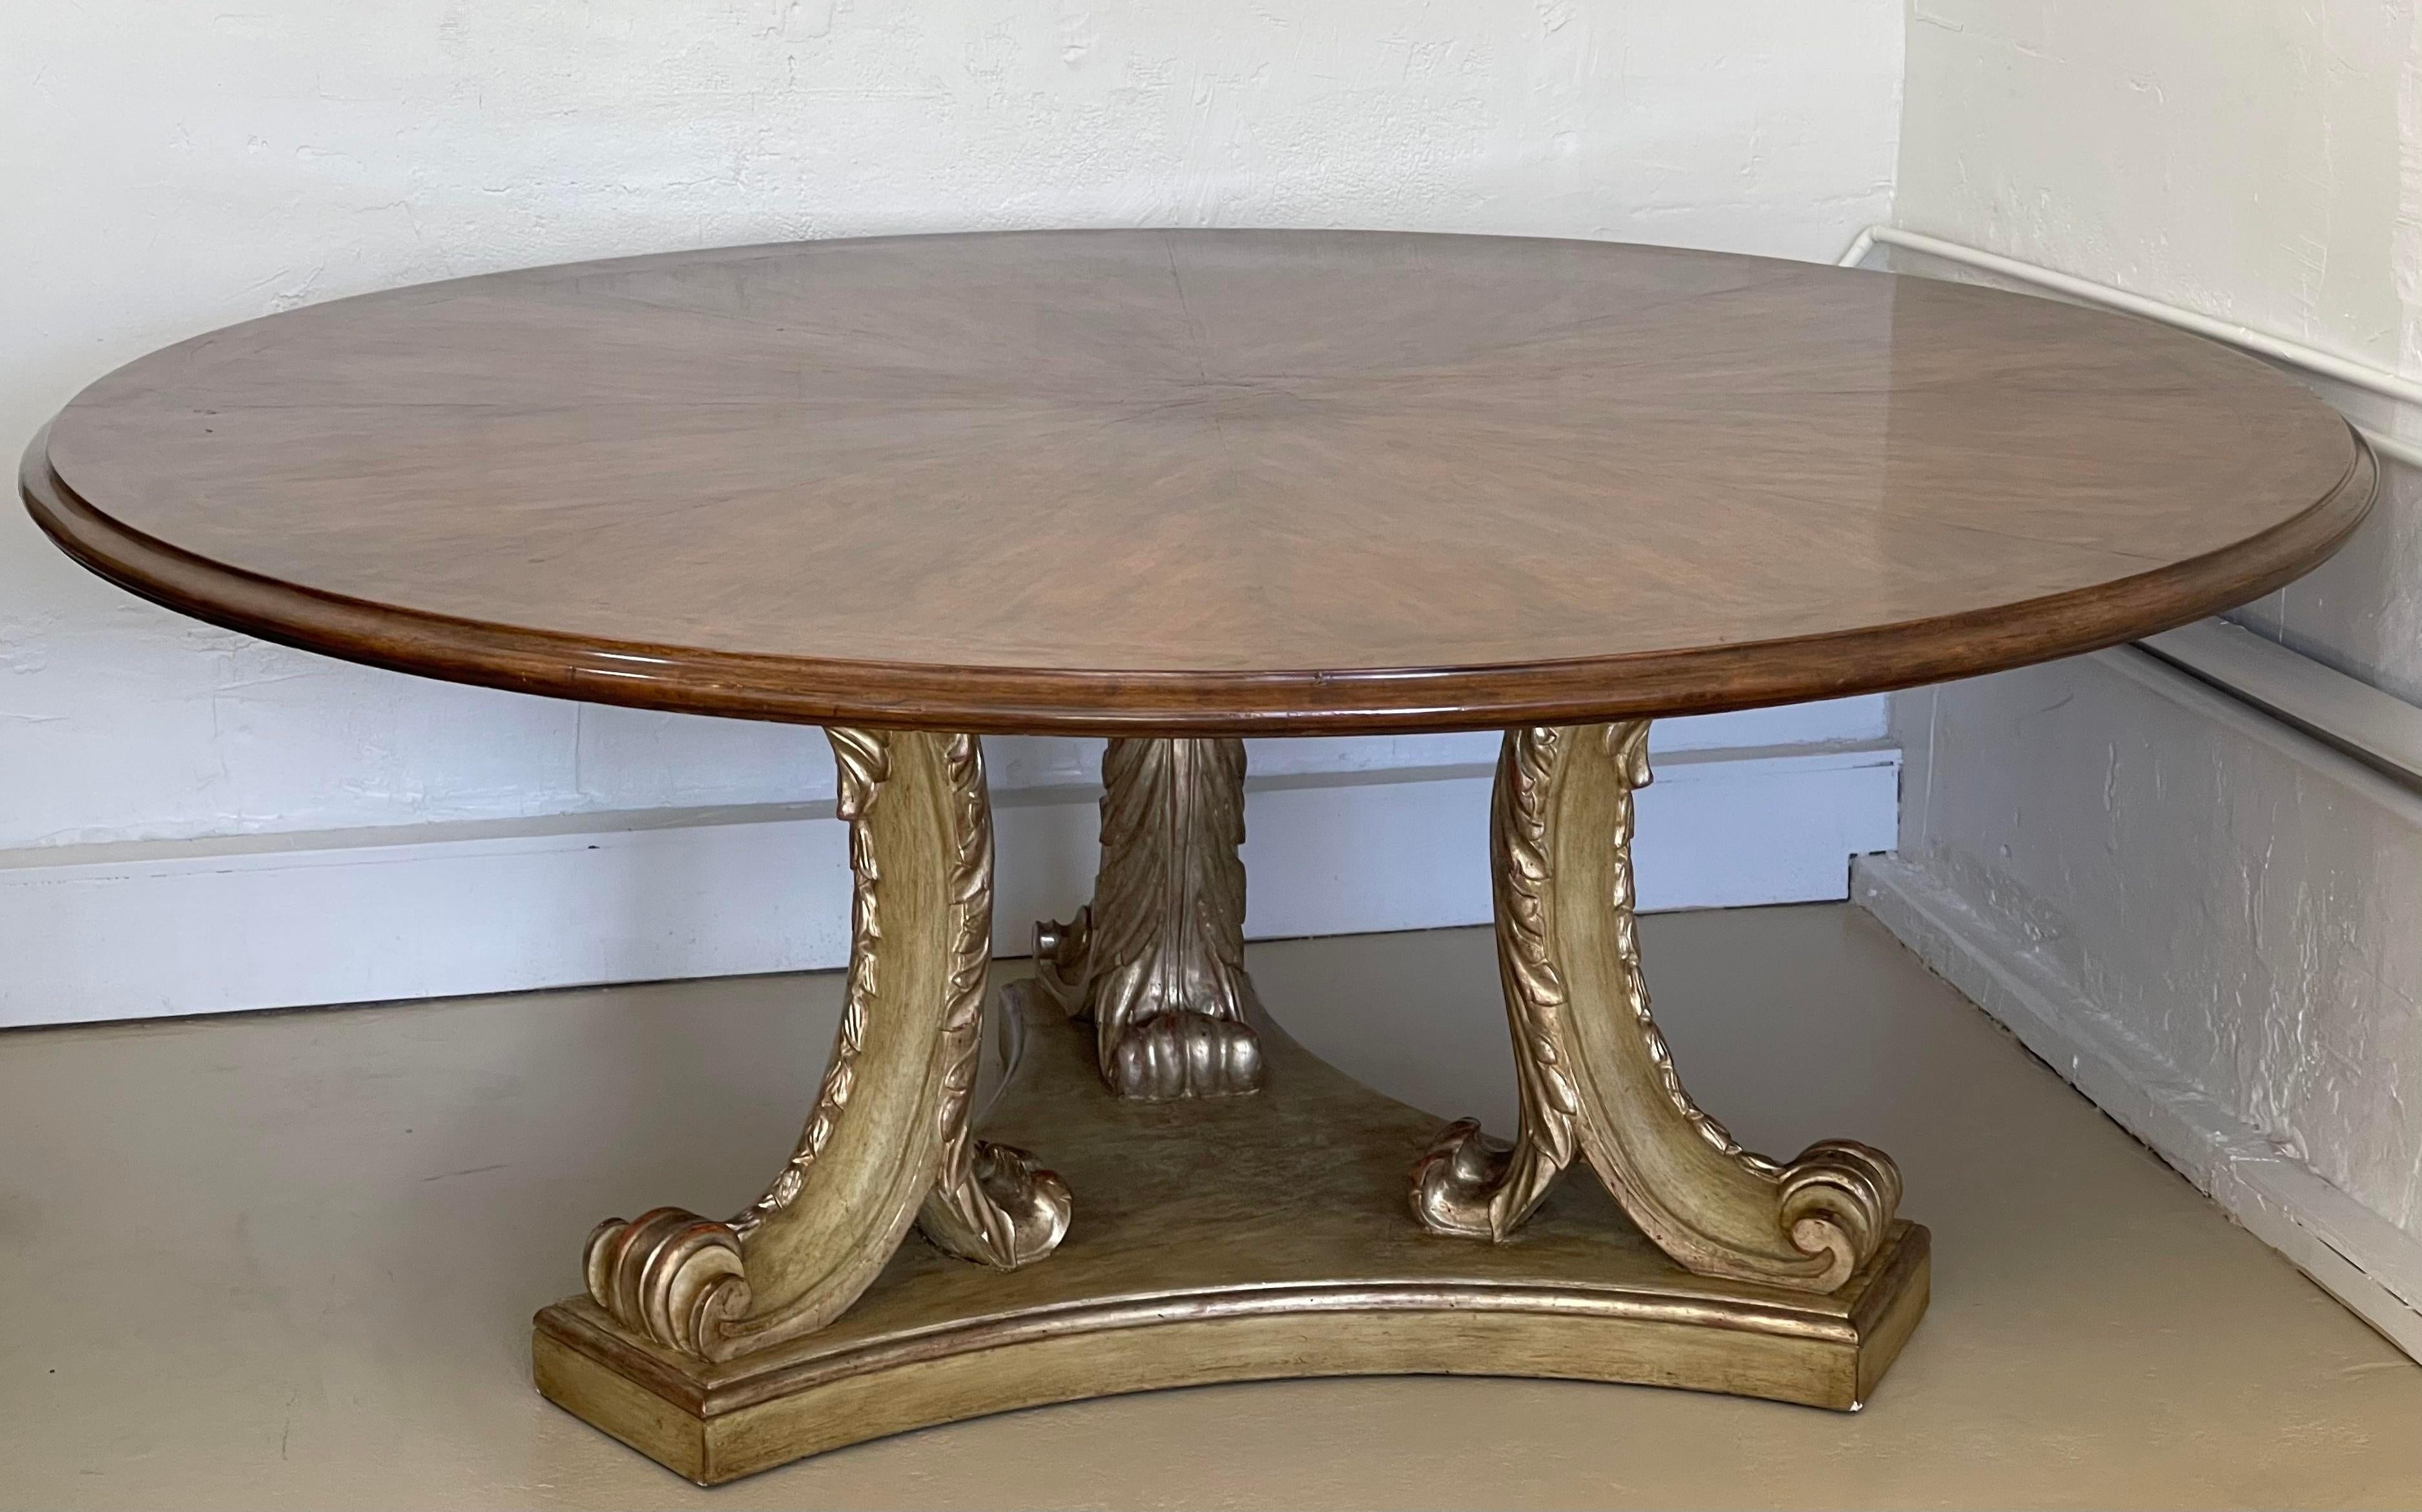 French Regency Style Dennis & Leen San Michele dining table. It measures 72” diameter and comes with outer expandable leaves that make the table 94” diameter.